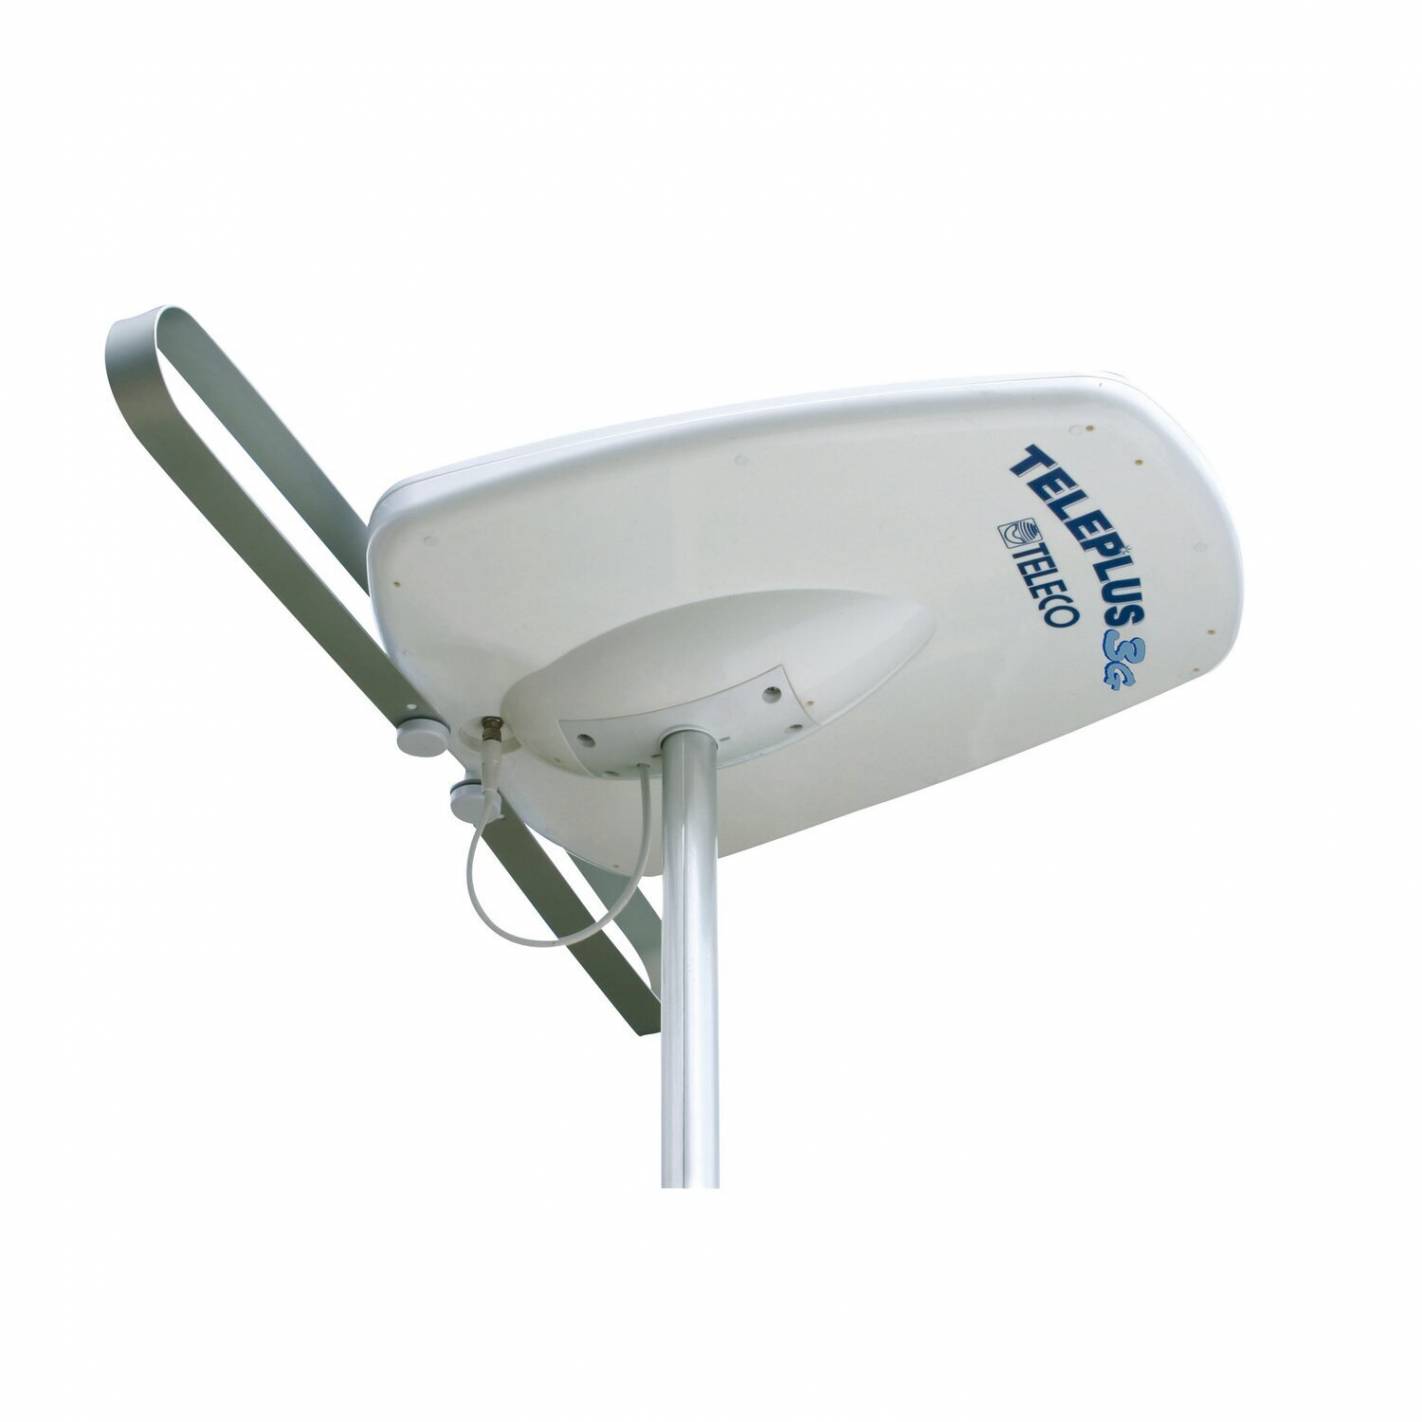 Antenne hertzienne directionnelle Teleplus 3G - Just4Camper Teleco RG-862221